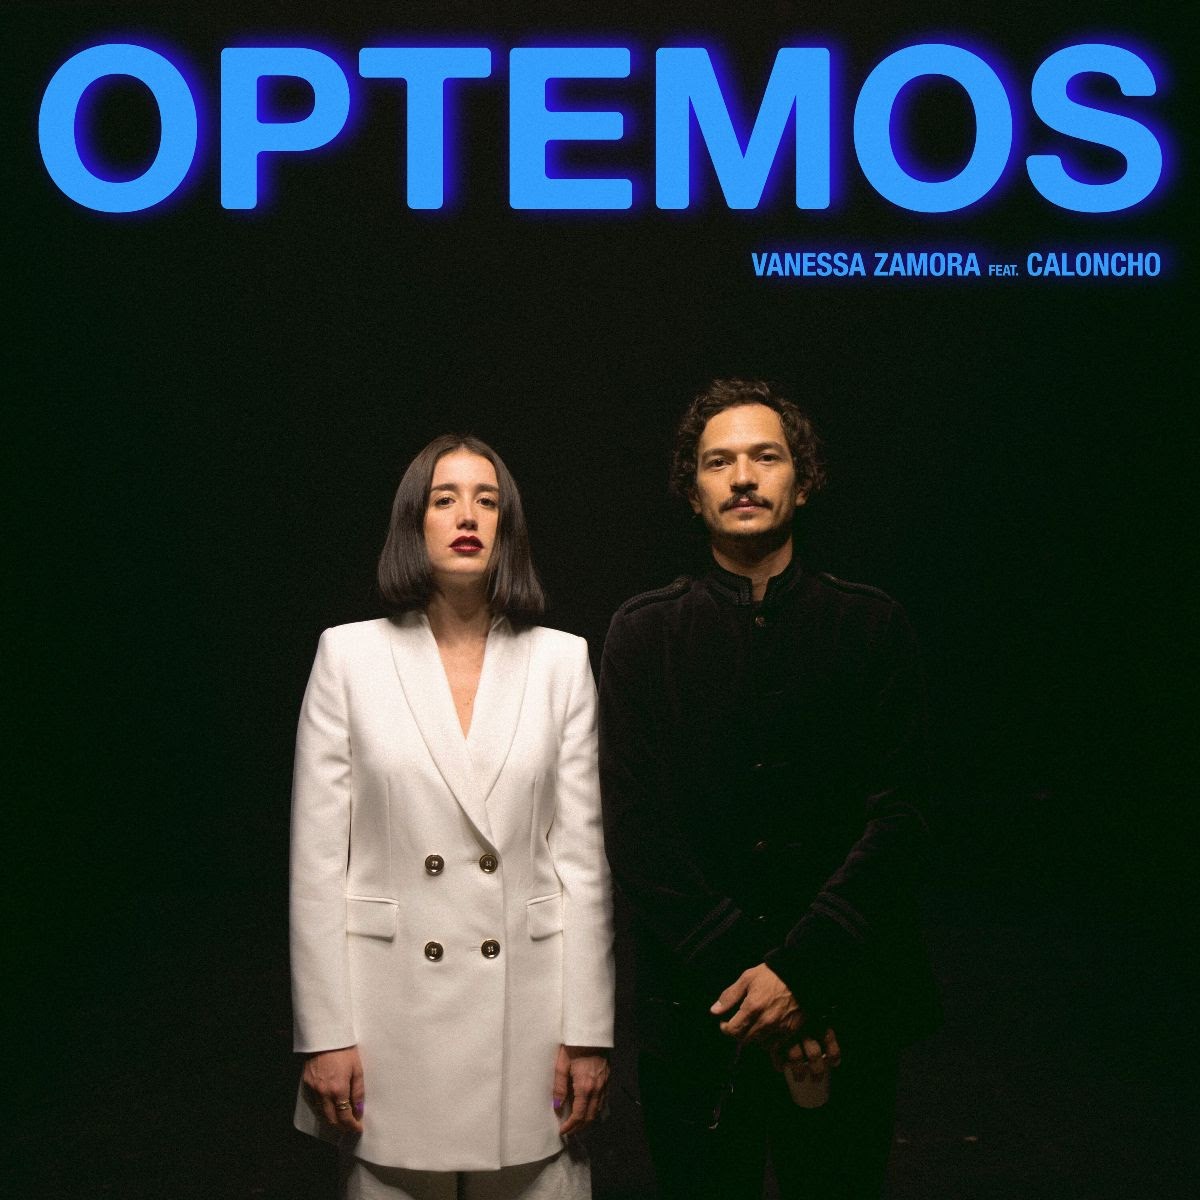 Vanessa Zamora's latest song “OPTEMOS” featuring Caloncho reminds us to shift out of autopilot